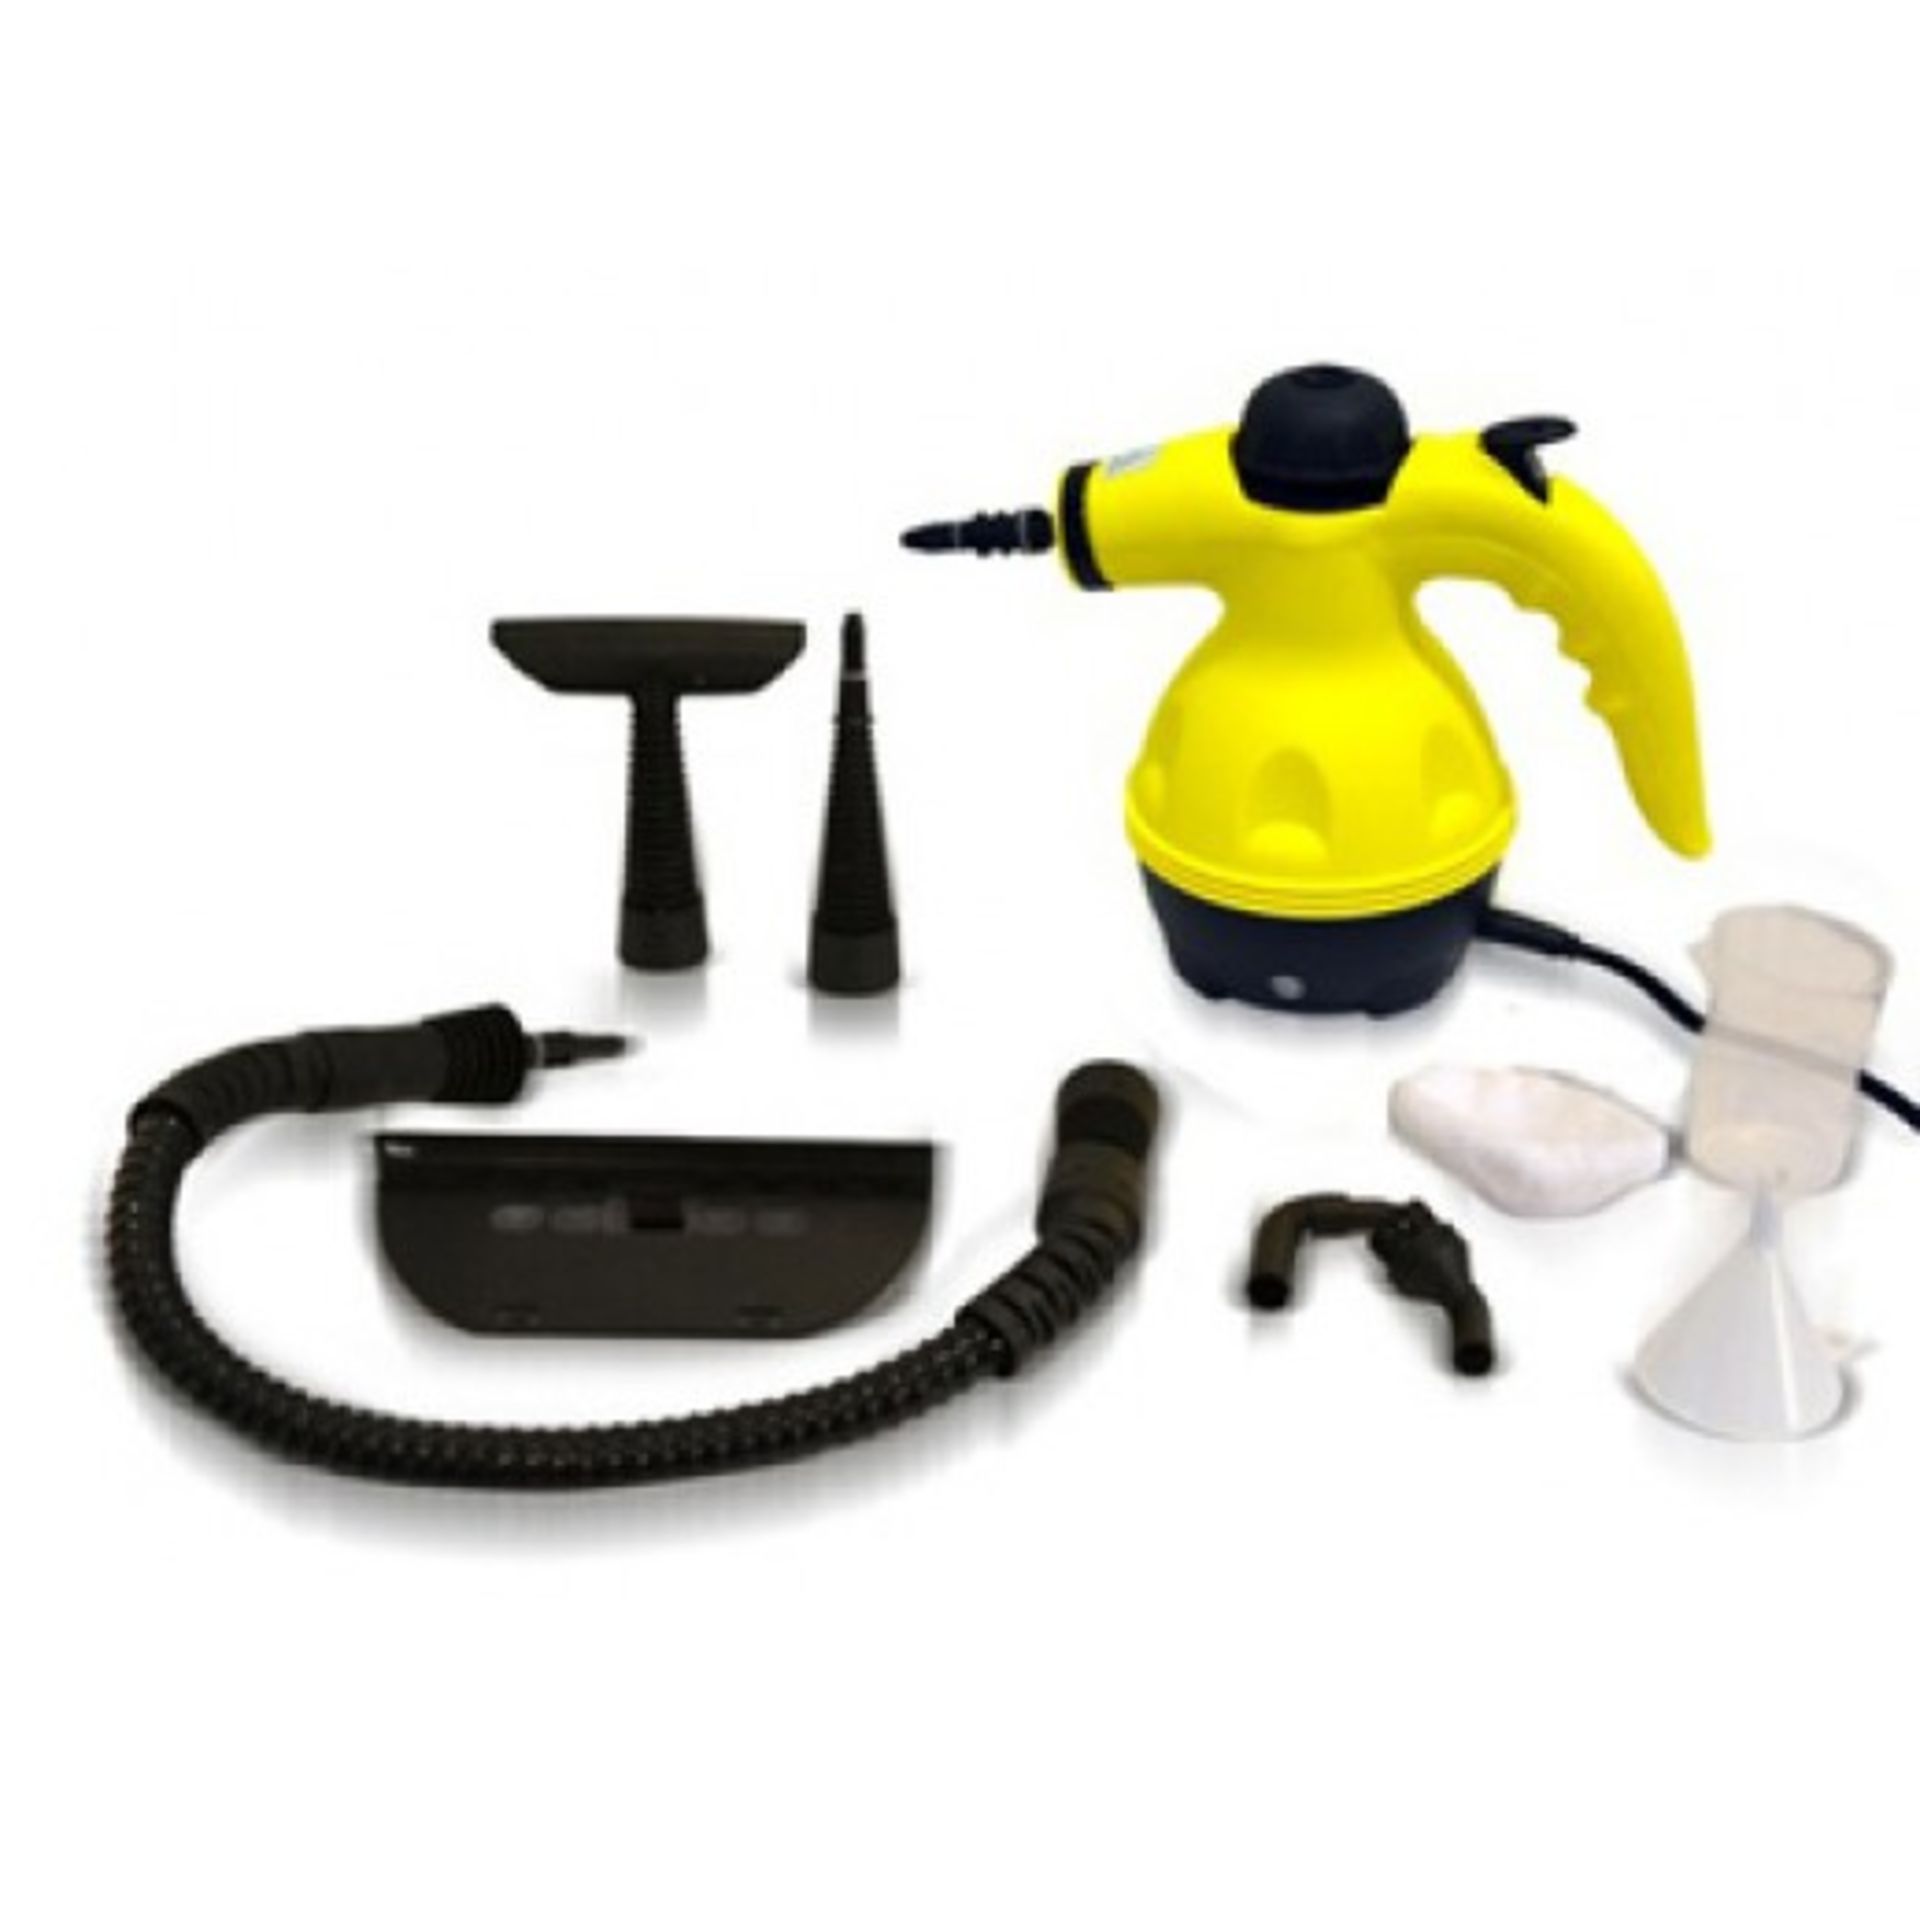 V *TRADE QTY* Brand New 900-1050w Steam Cleaner-Accessories-Steam Hose-Window Cleaning Tool-Direct